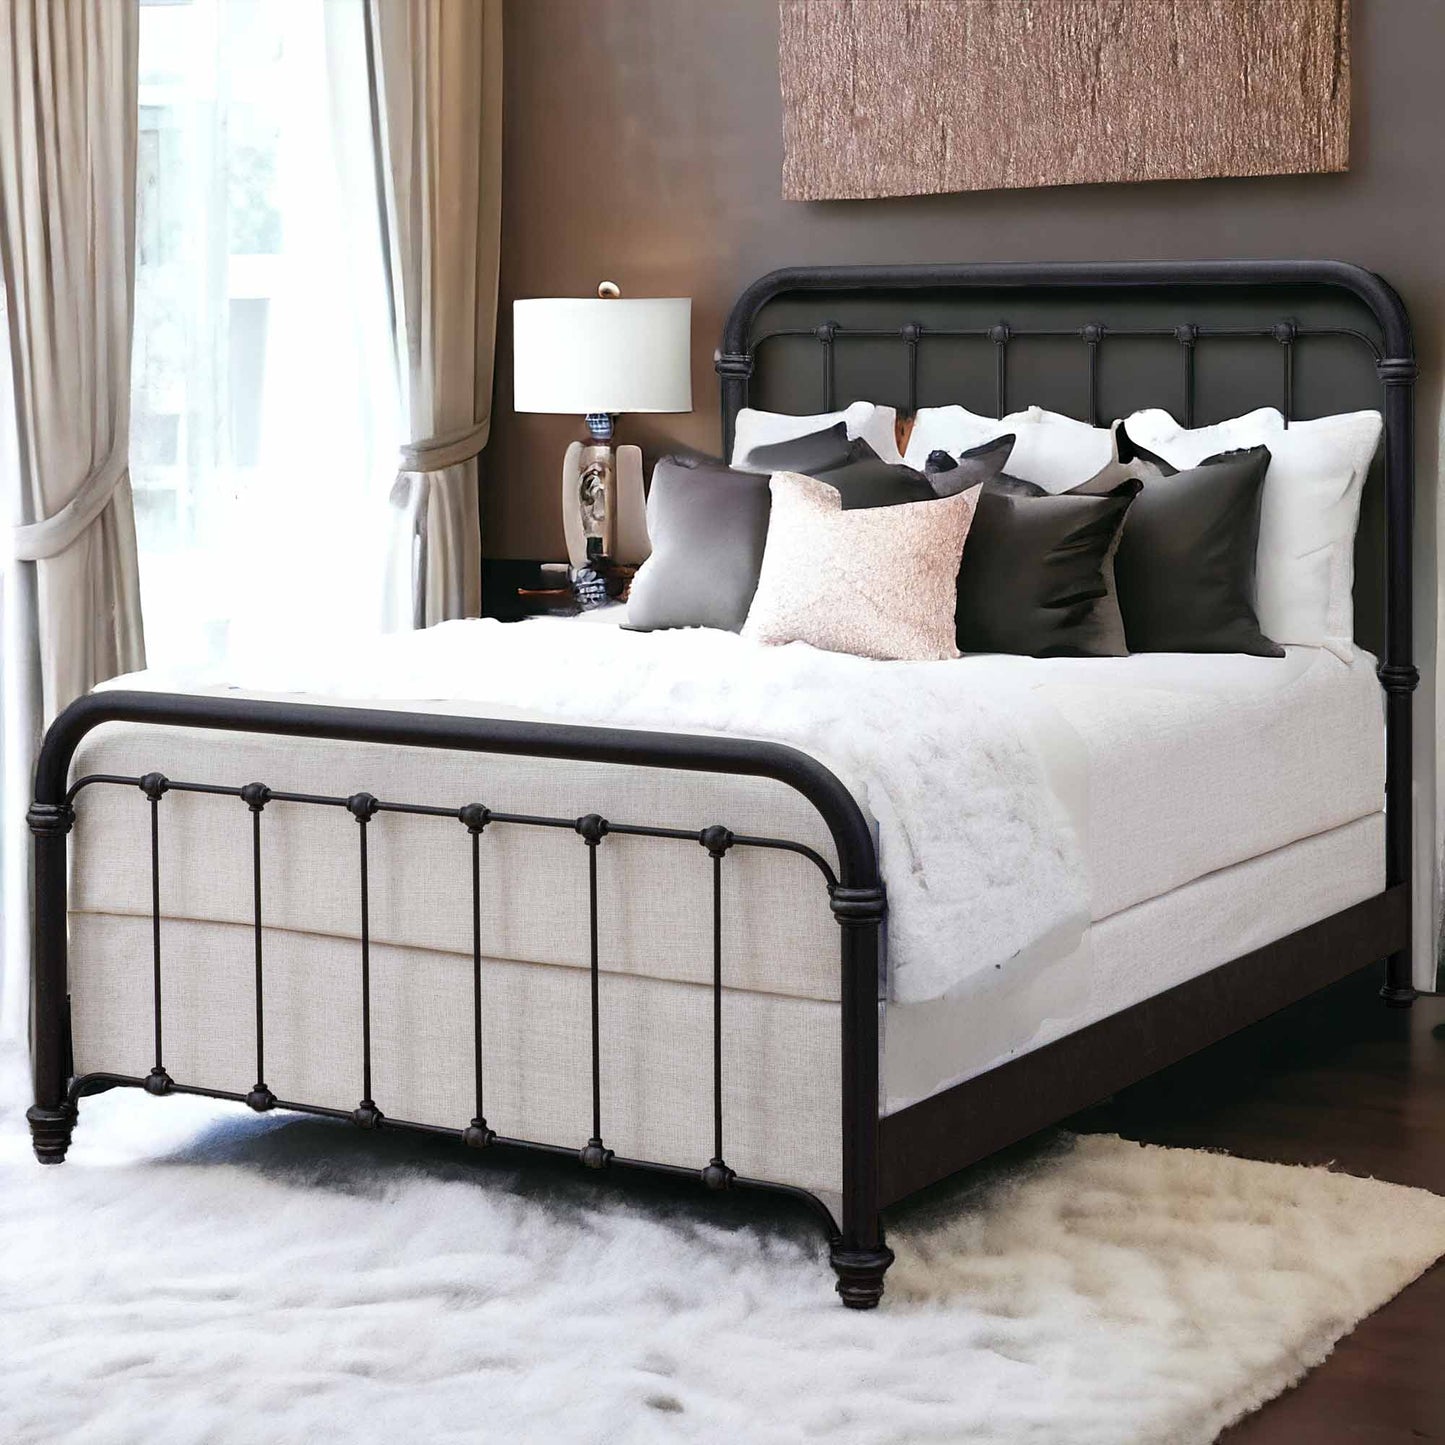 Matriae's Braden Iron Bed 1001 Wesley Allen Aged Iron Finish Queen Size Wrought Iron Bed